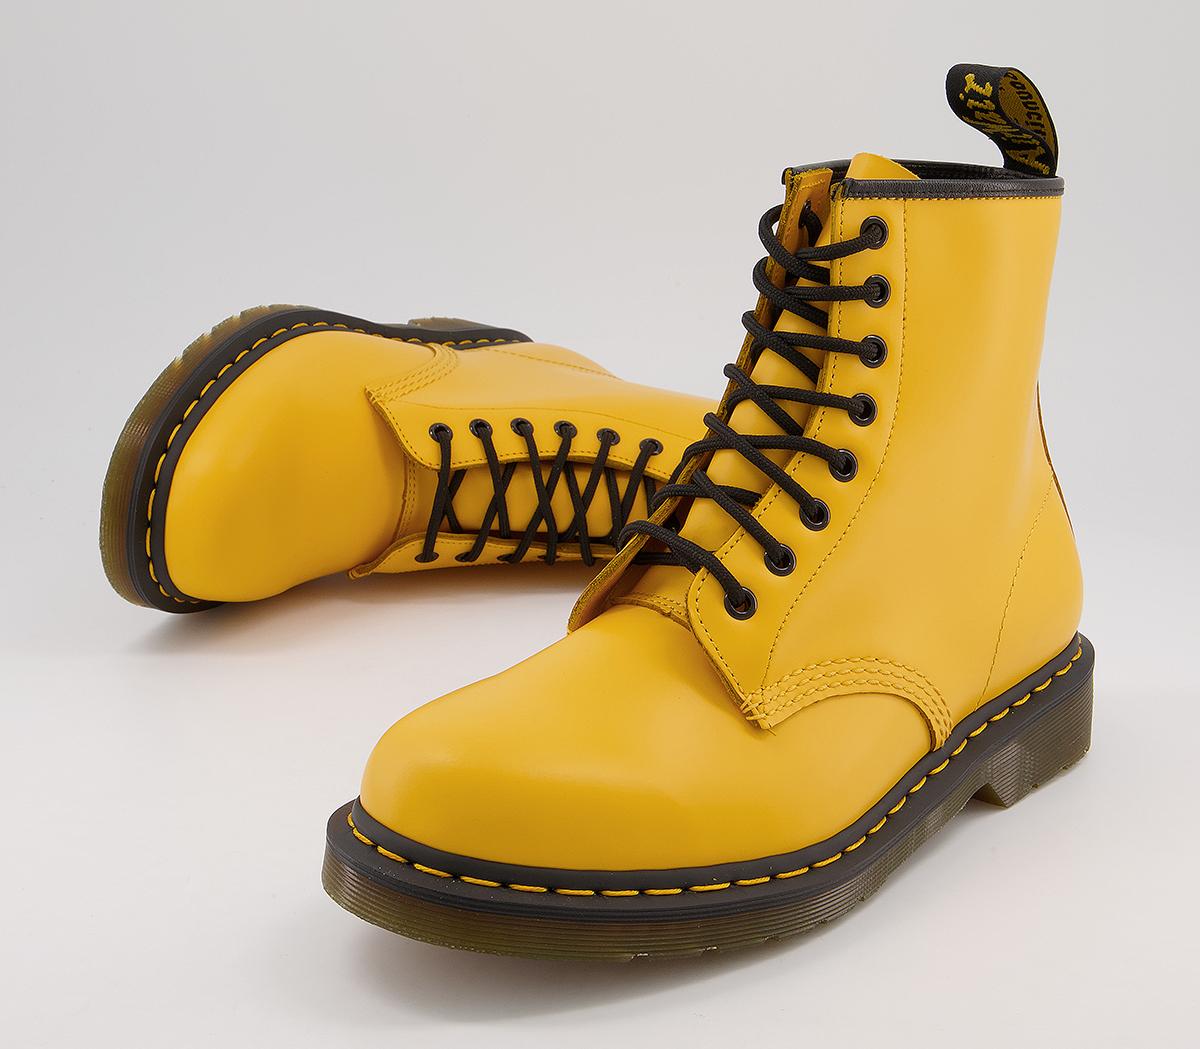 Dr. Martens 1460 8 Eye Boots Dms Yellow - Ankle Boots